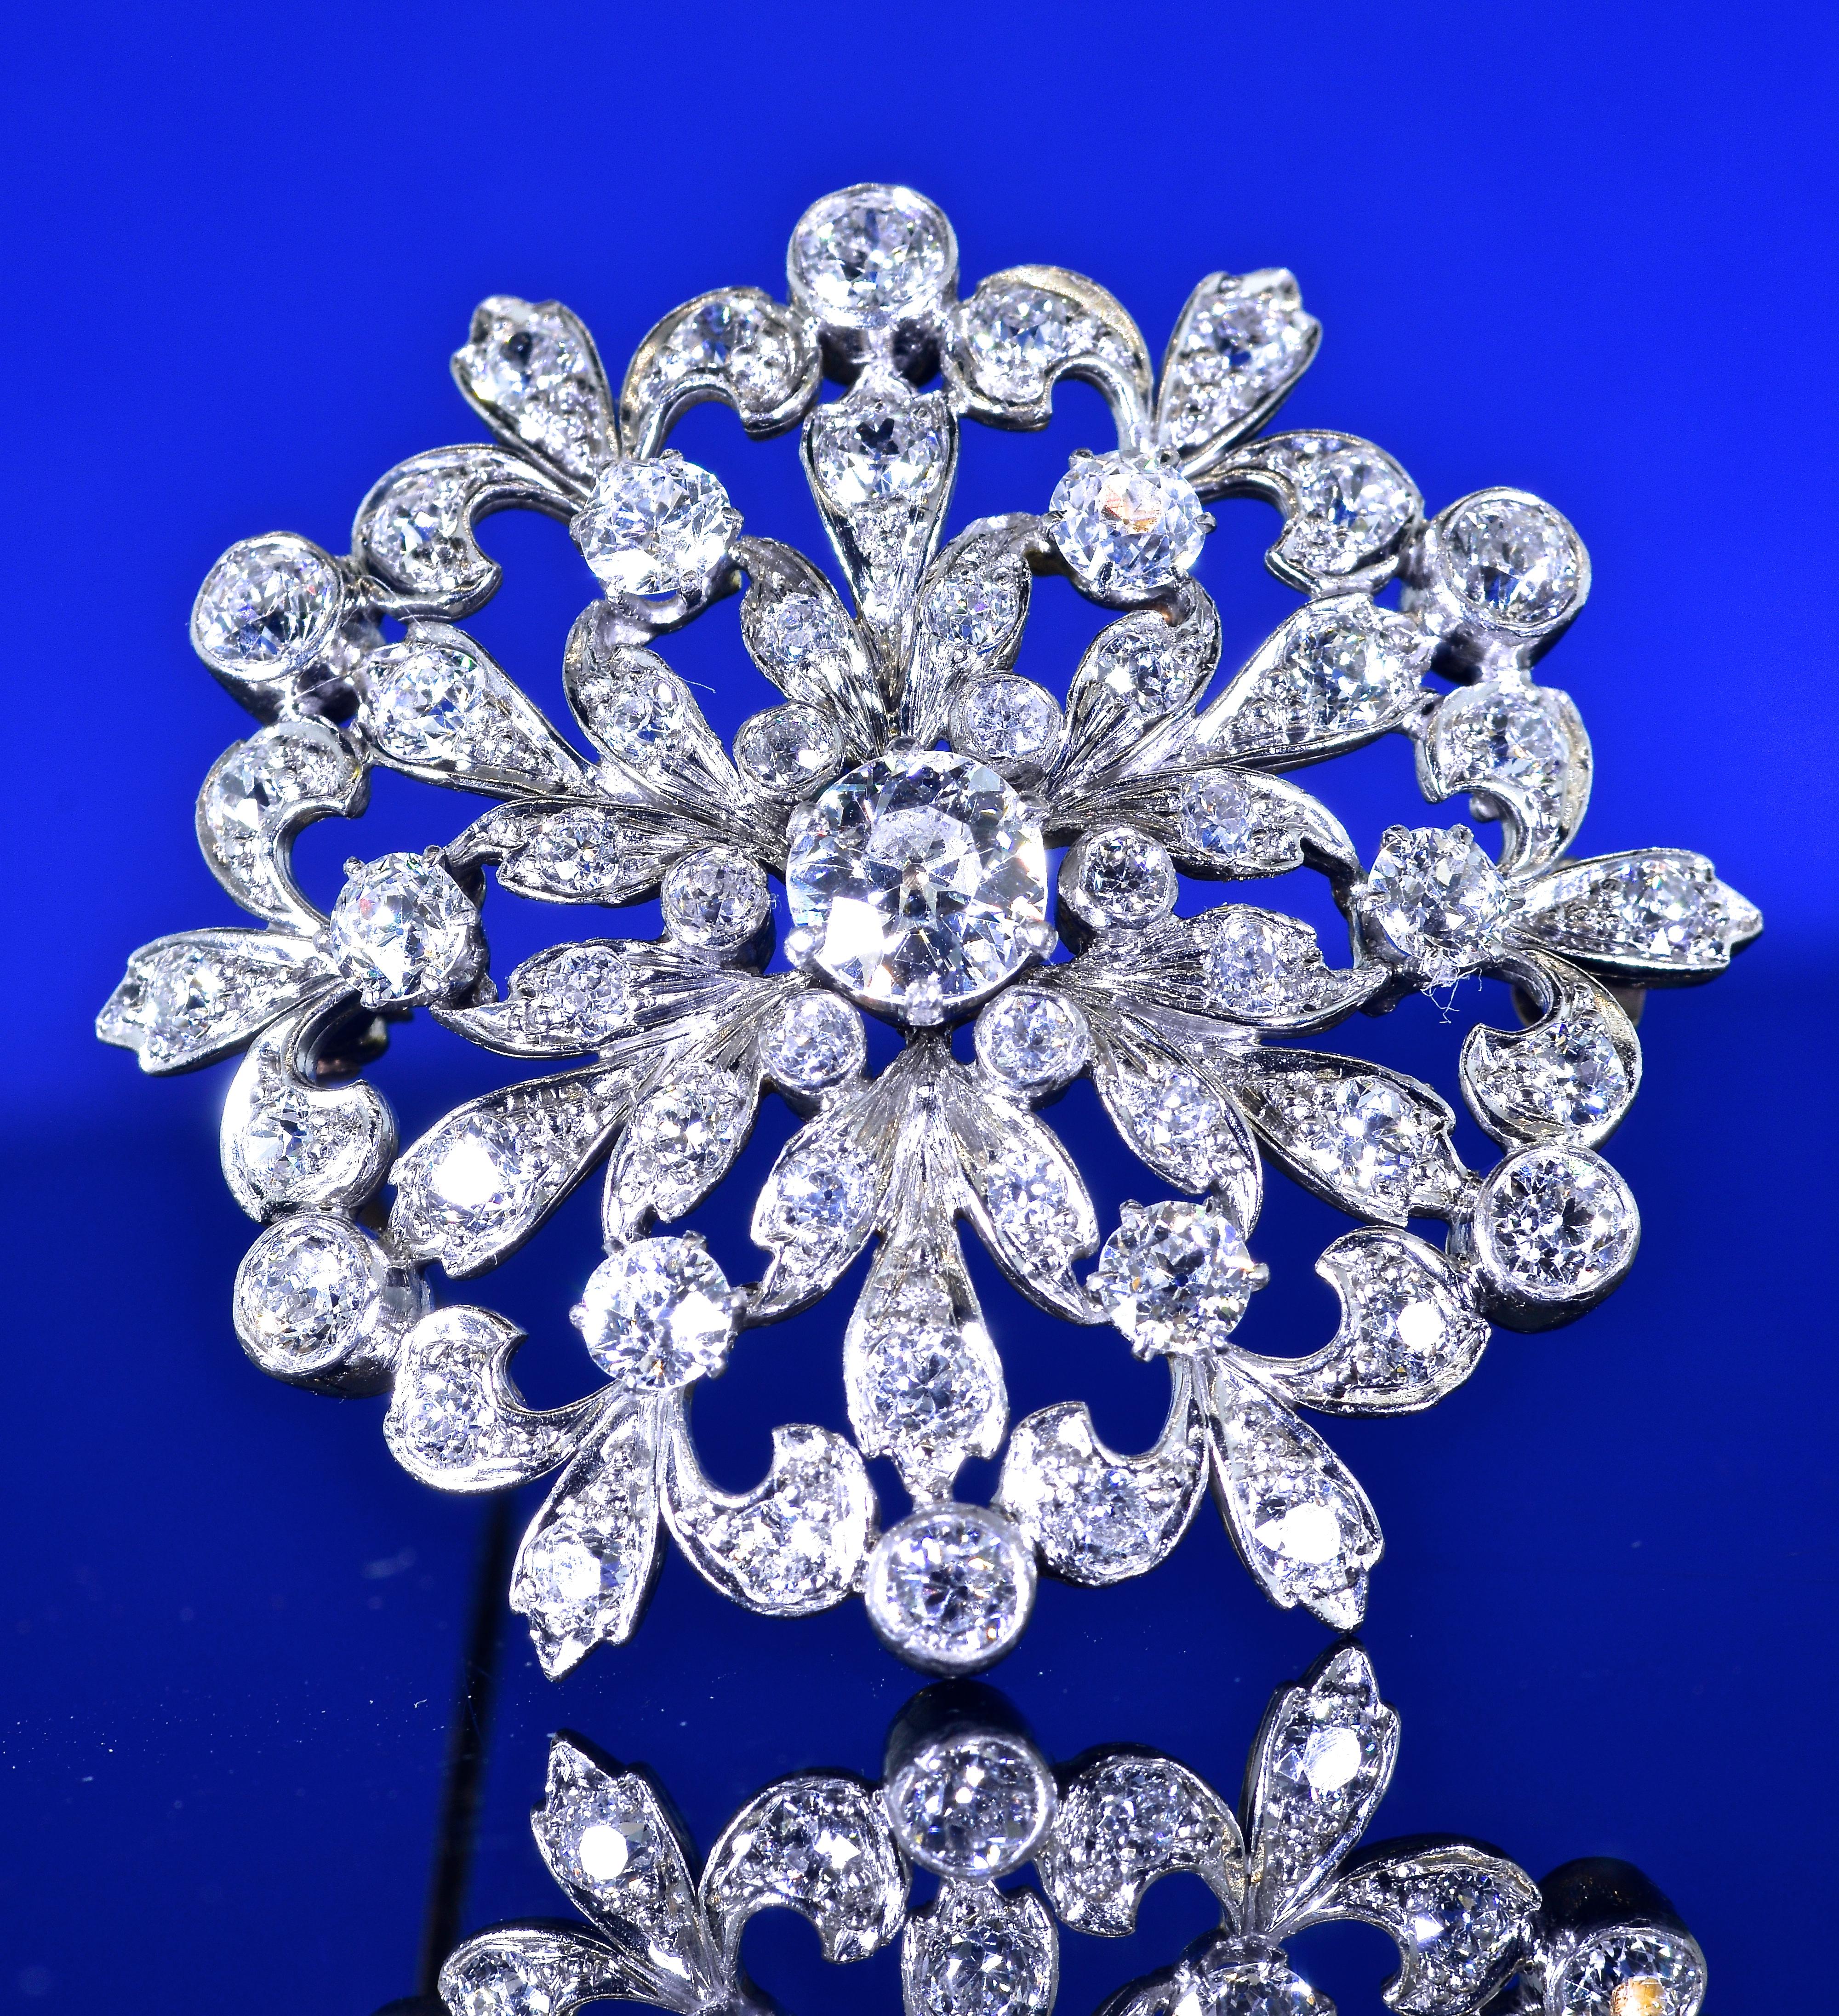 Antique Edwardian diamond pin/pendant possessing very fine diamonds.  This brooch or pendant is one of the better examples of a starburst brooch from this time period. There are 55 well matched European cut diamonds estimated to weigh 3.33 cts. The